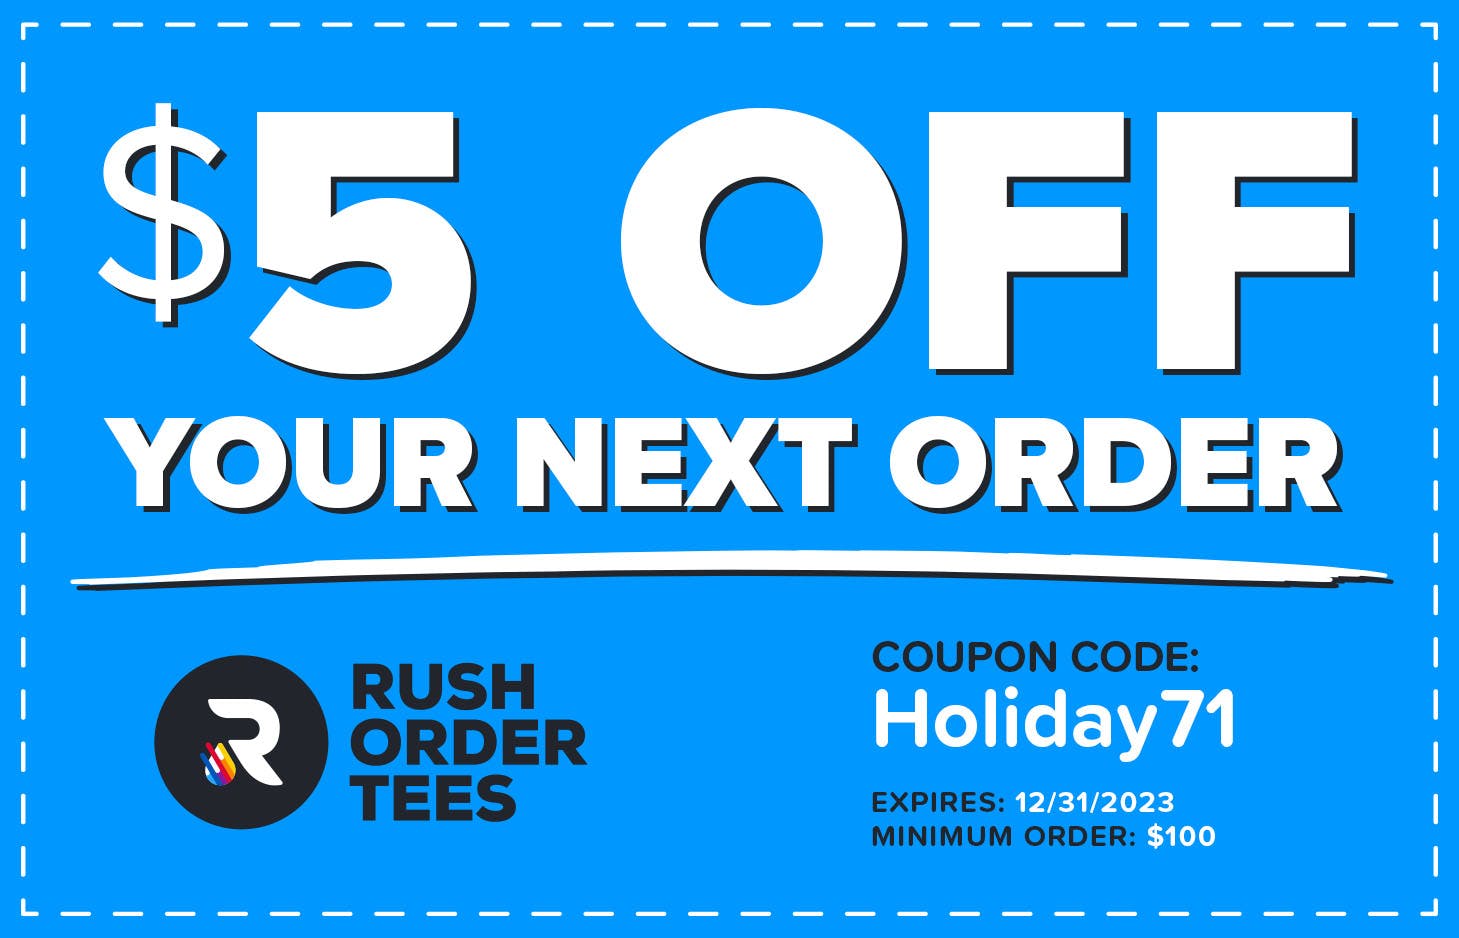 RushOrderTees Promo Codes & Coupons Save on Your Order